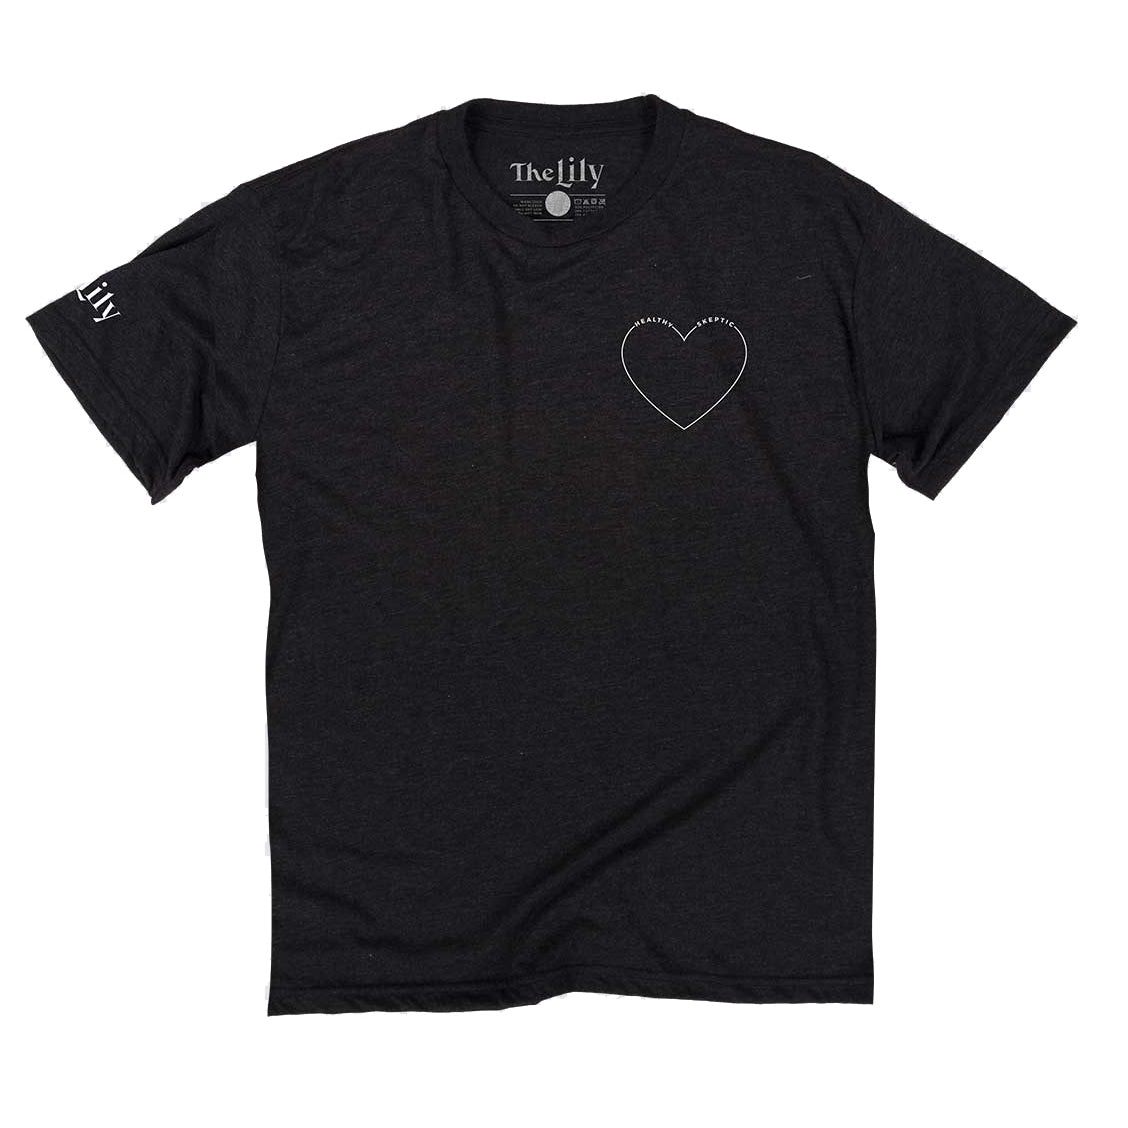 The Lily t-shirt with embroidered heart logo in white and "the lily" on sleeve also in white . Short sleeve shirt, light black marbled color. 